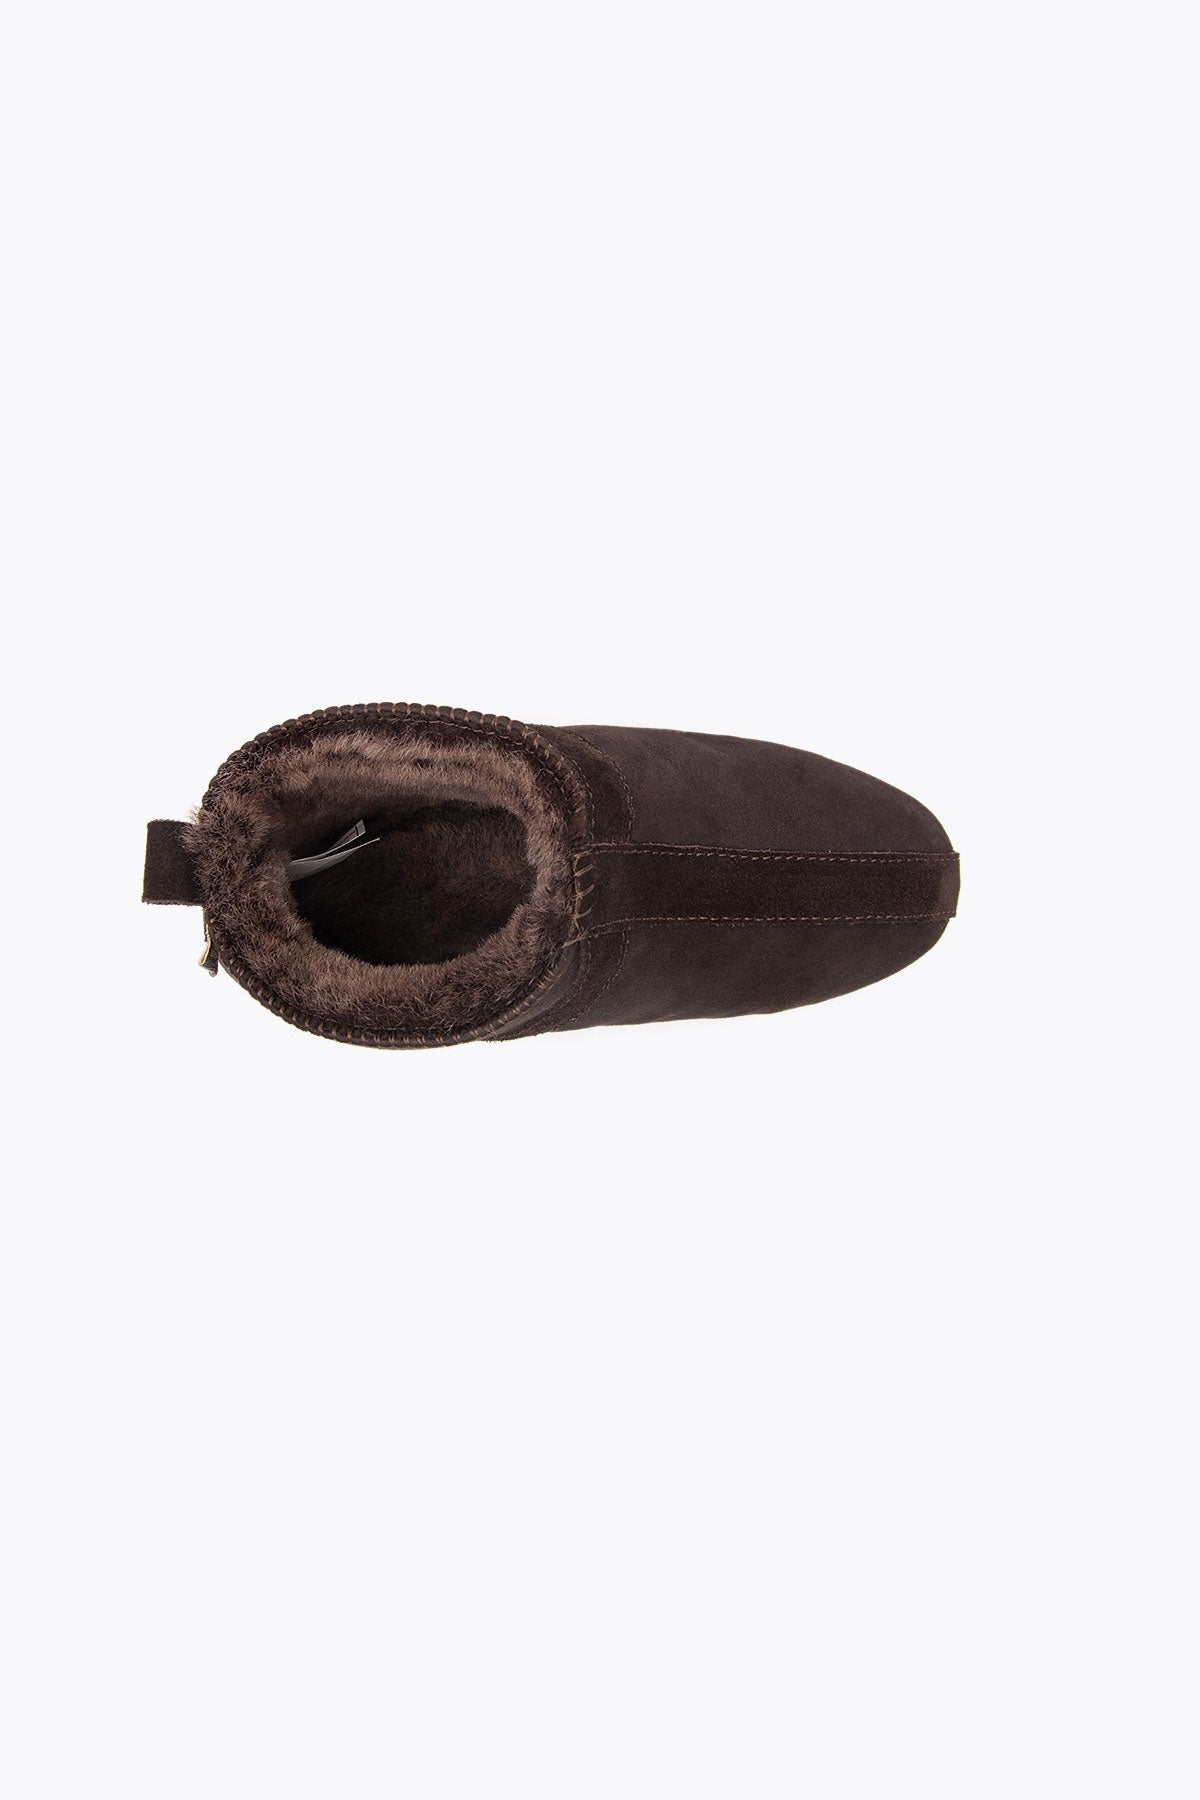 Pegia Homer Shearling Kids' Bootie Slippers